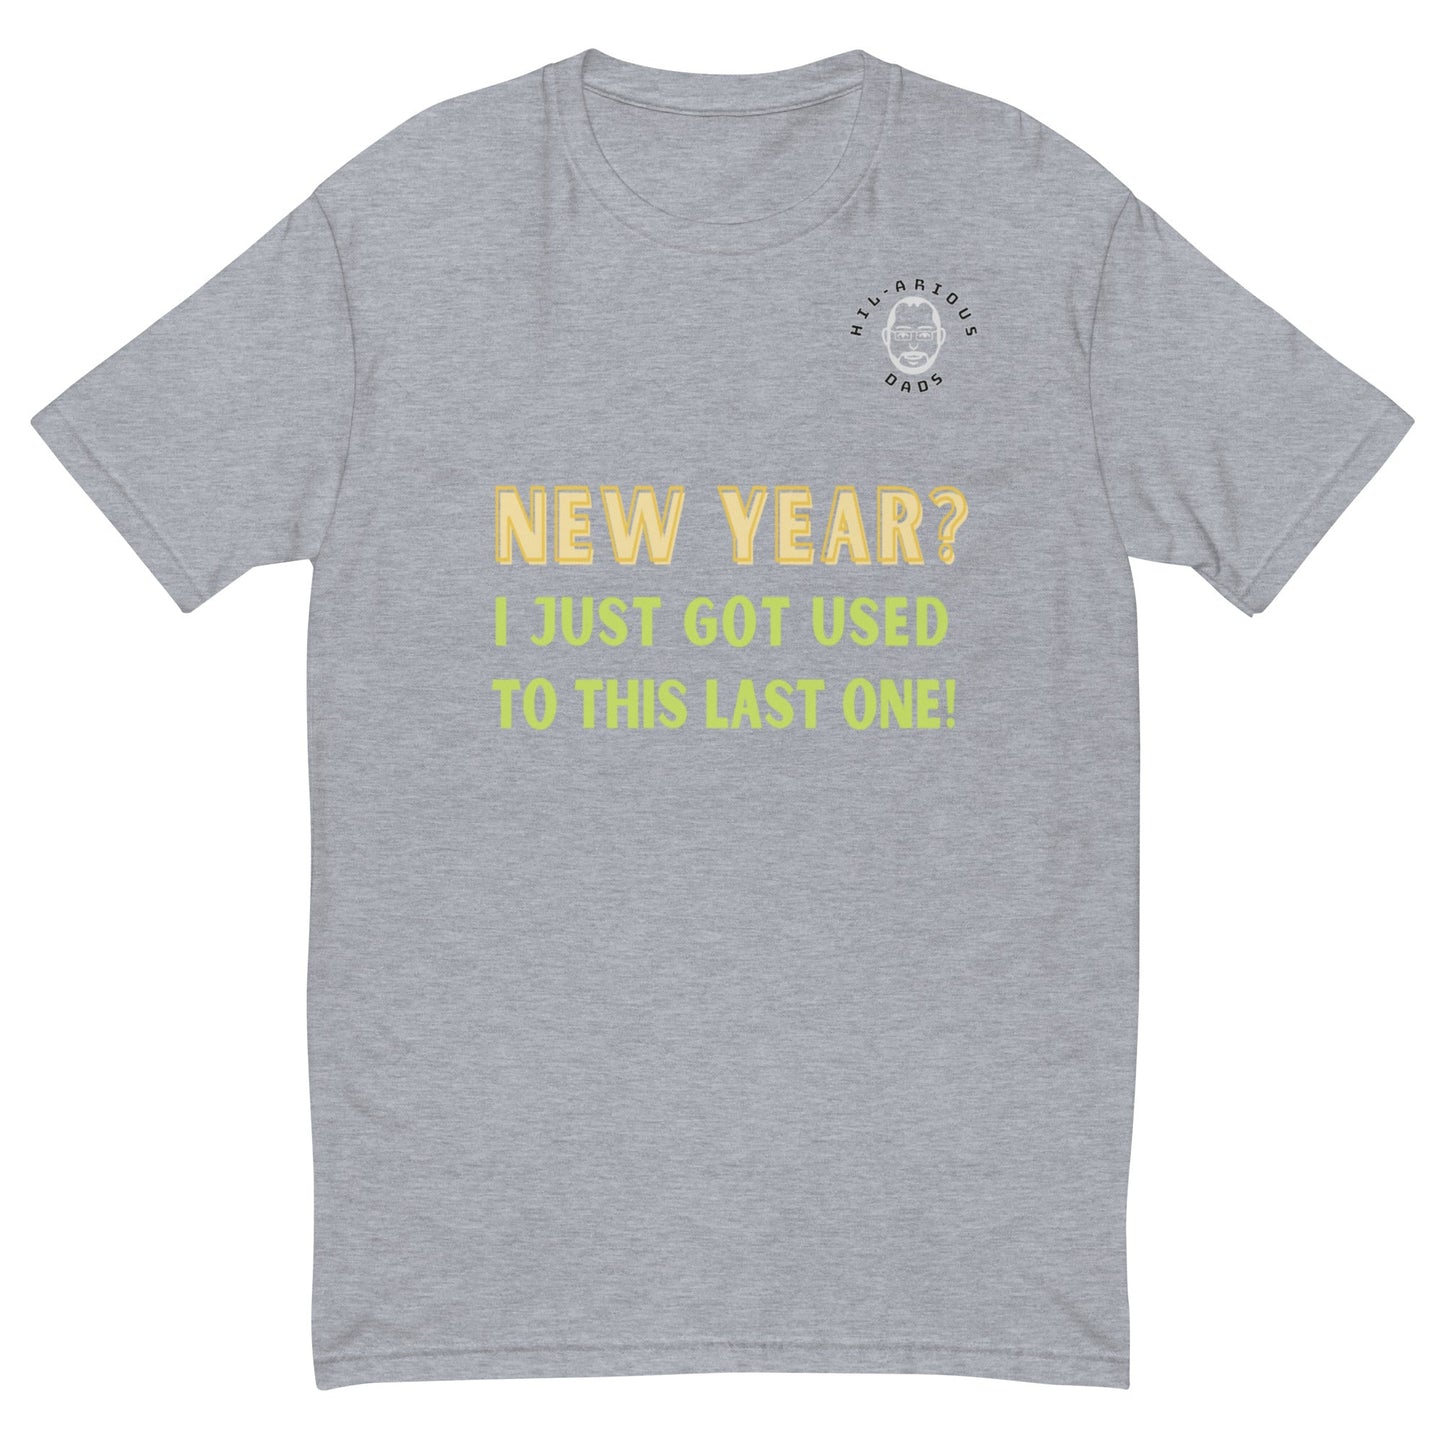 New Year? I just got used to this last one!-T-shirt - Hil-arious Dads